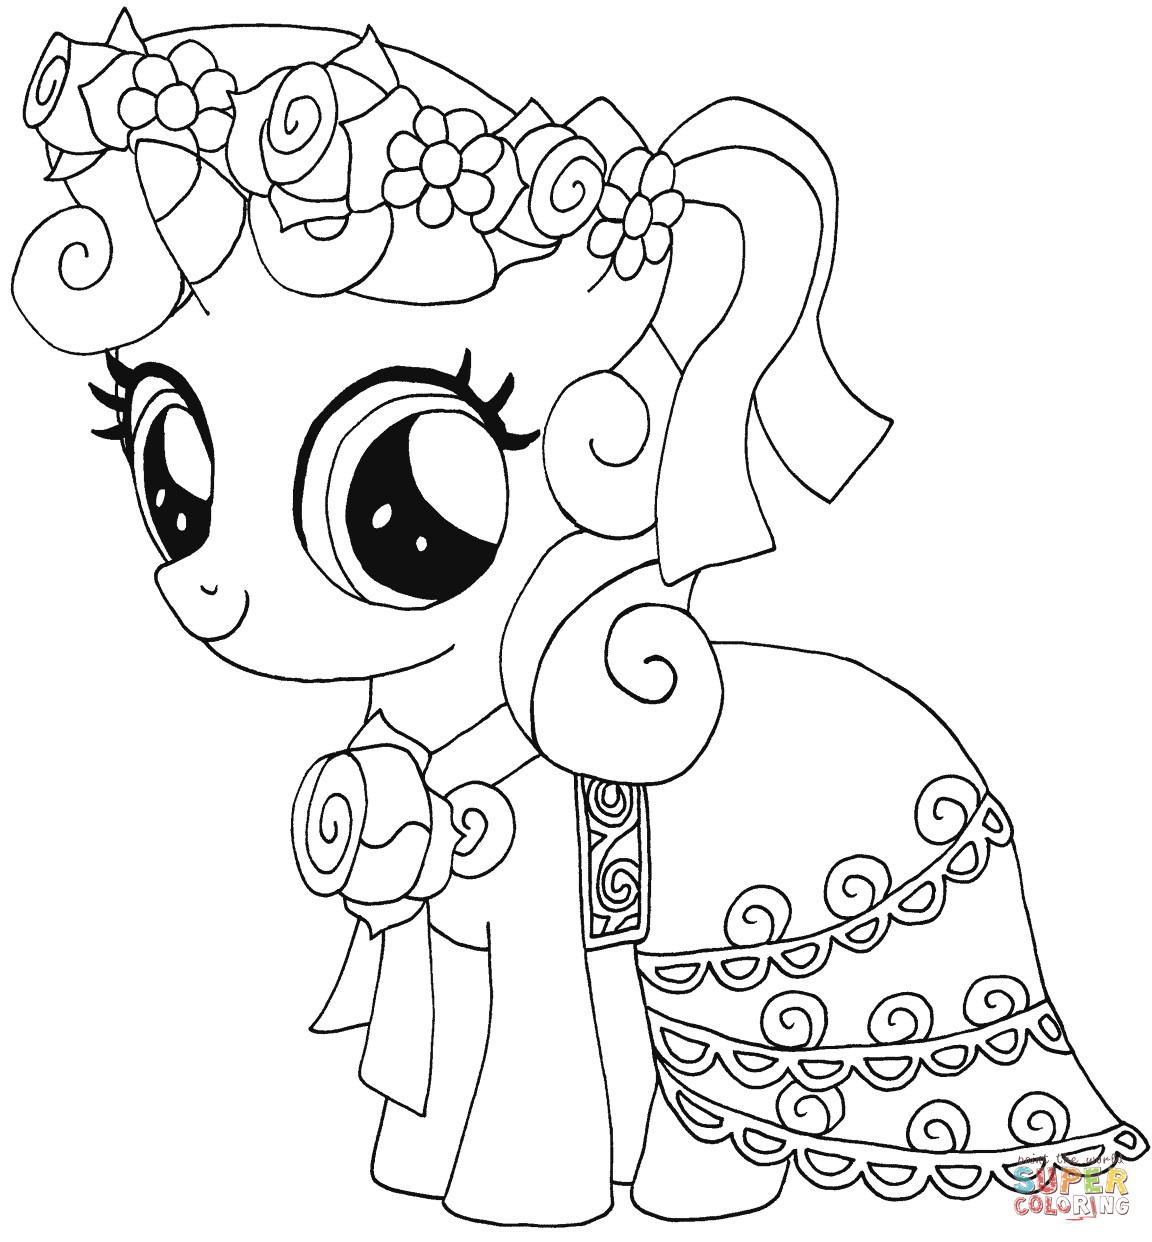 Printable My Little Pony Coloring Pages
 My Little Pony Sweetie Belle coloring page